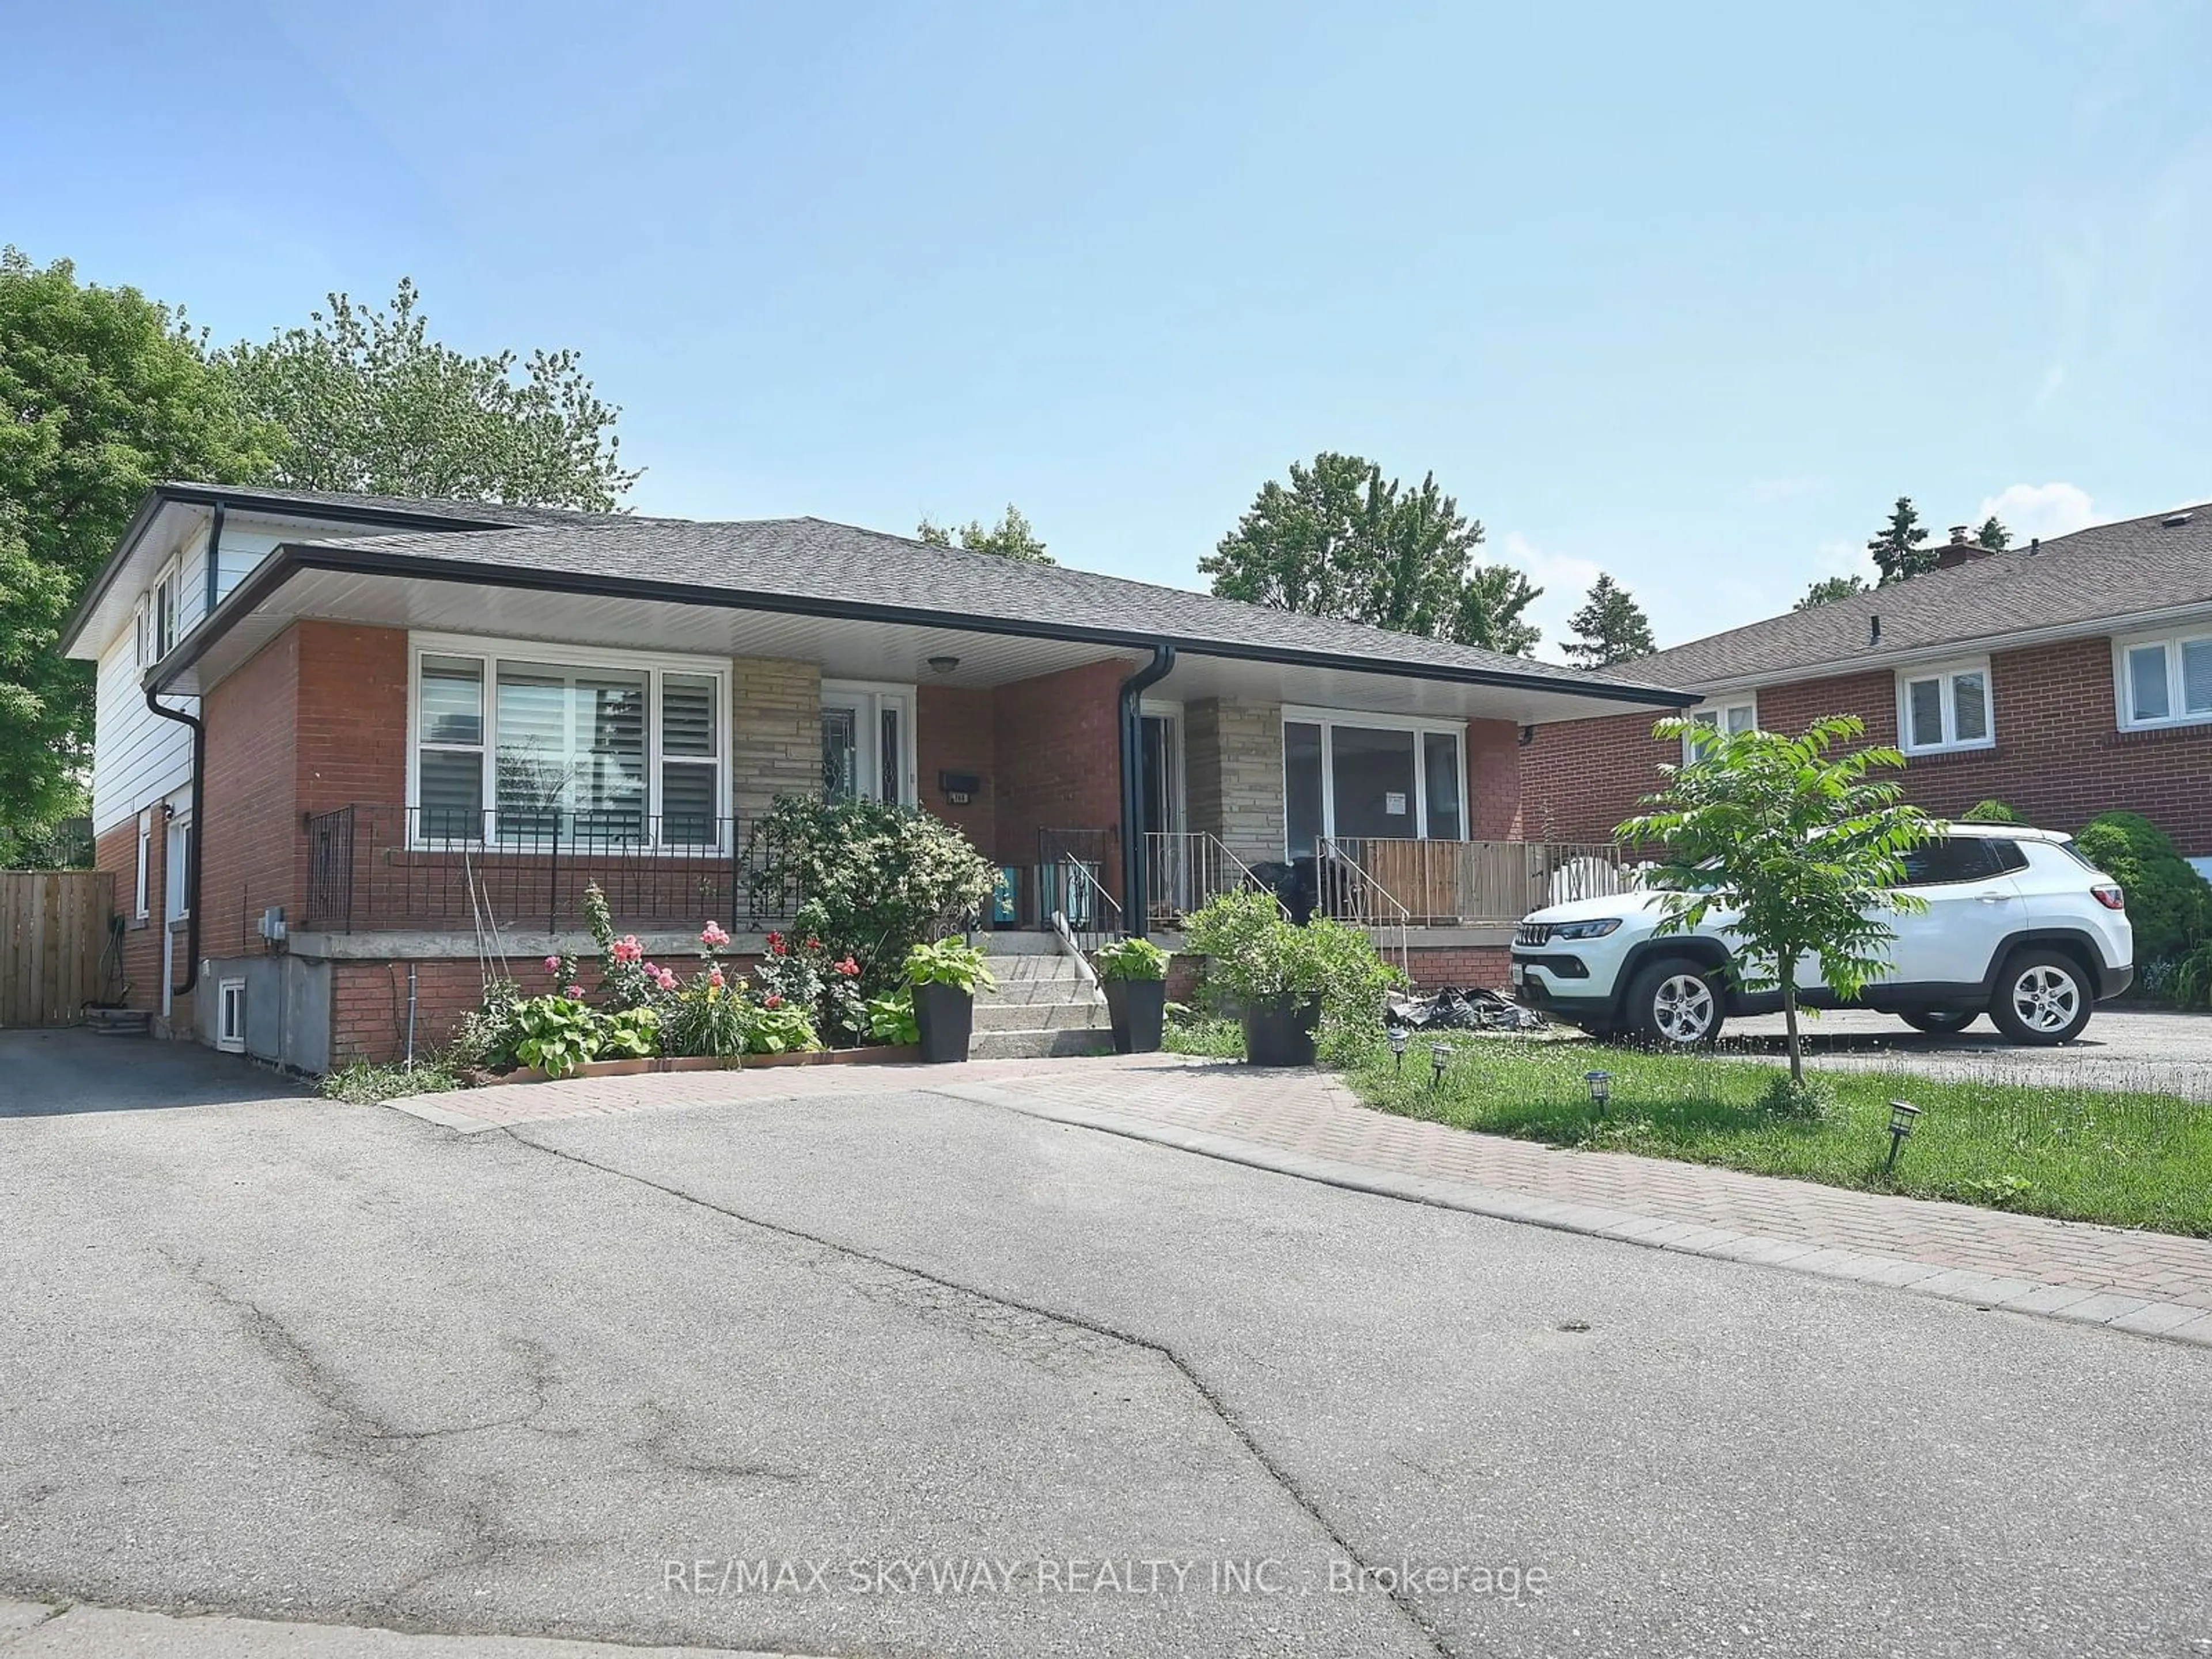 Home with brick exterior material for 168 Voltarie Cres, Mississauga Ontario L5A 2A4